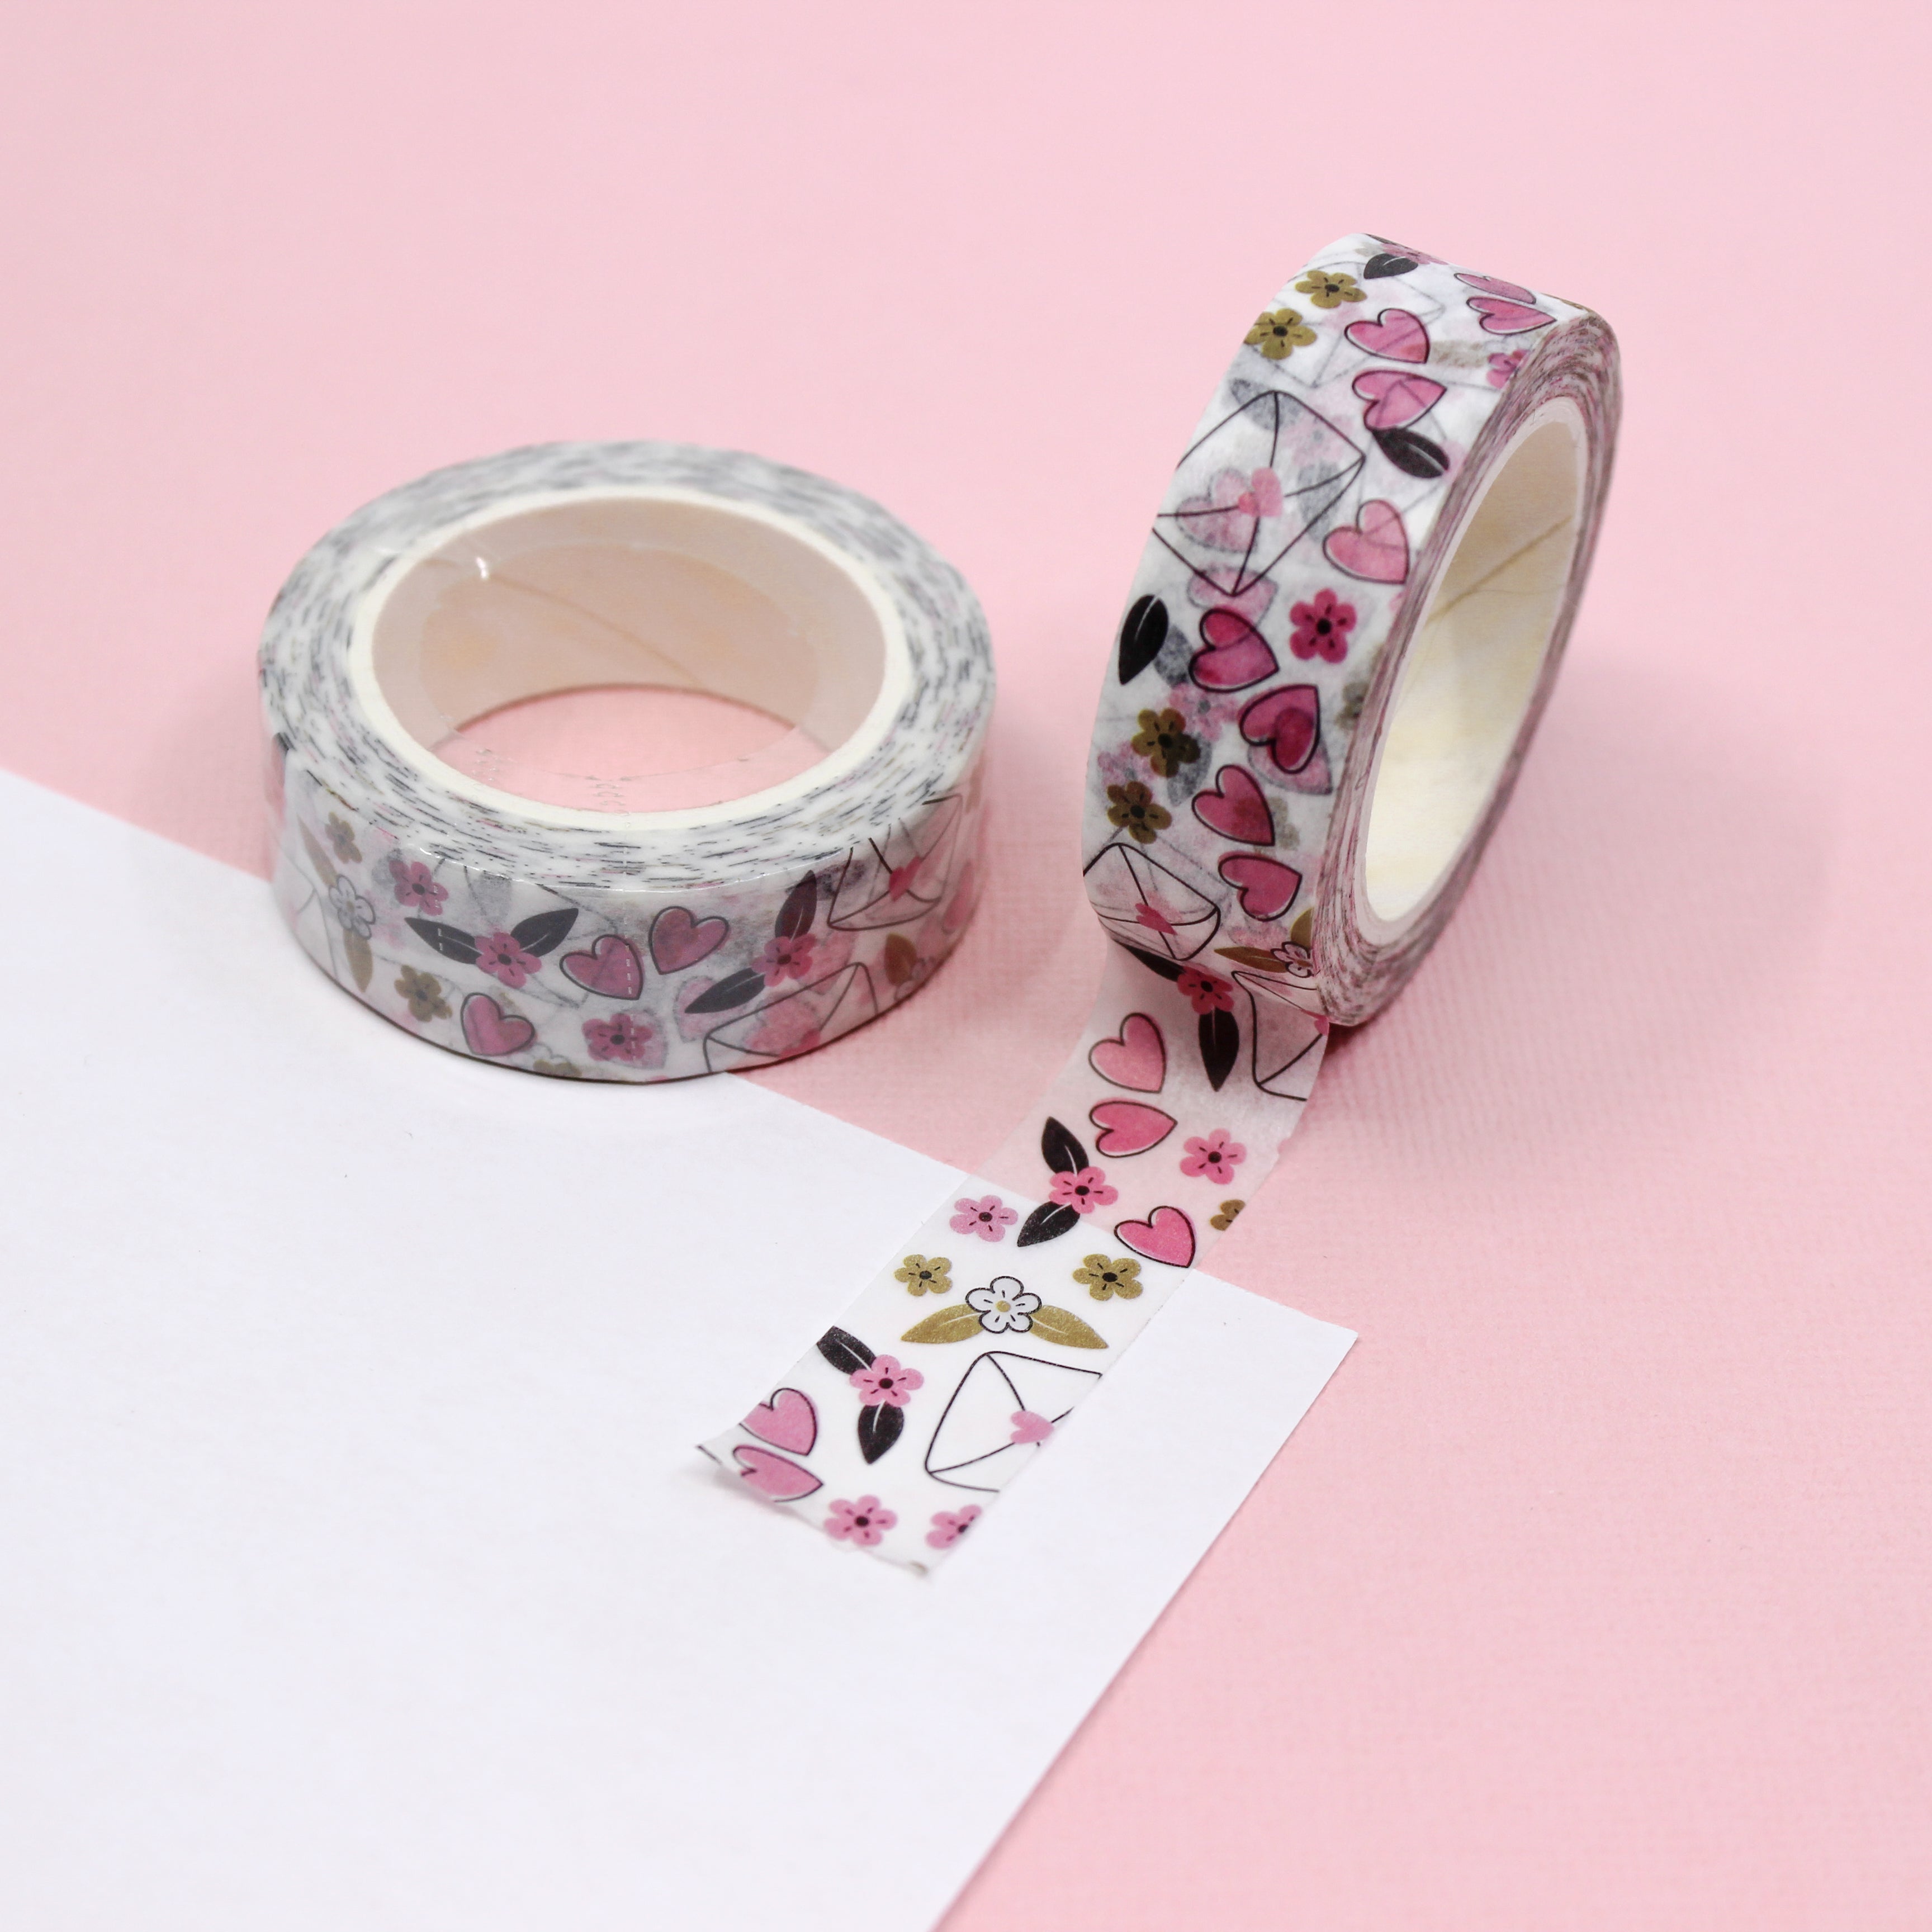 This Love Letters washi tape is an expression of love with delicate heart and floral motifs that are perfect for adding a cute, romantic touch to your greeting cards, scrapbooks, or snail mail. This tape is sold at BBB Supplies Craft Shop.